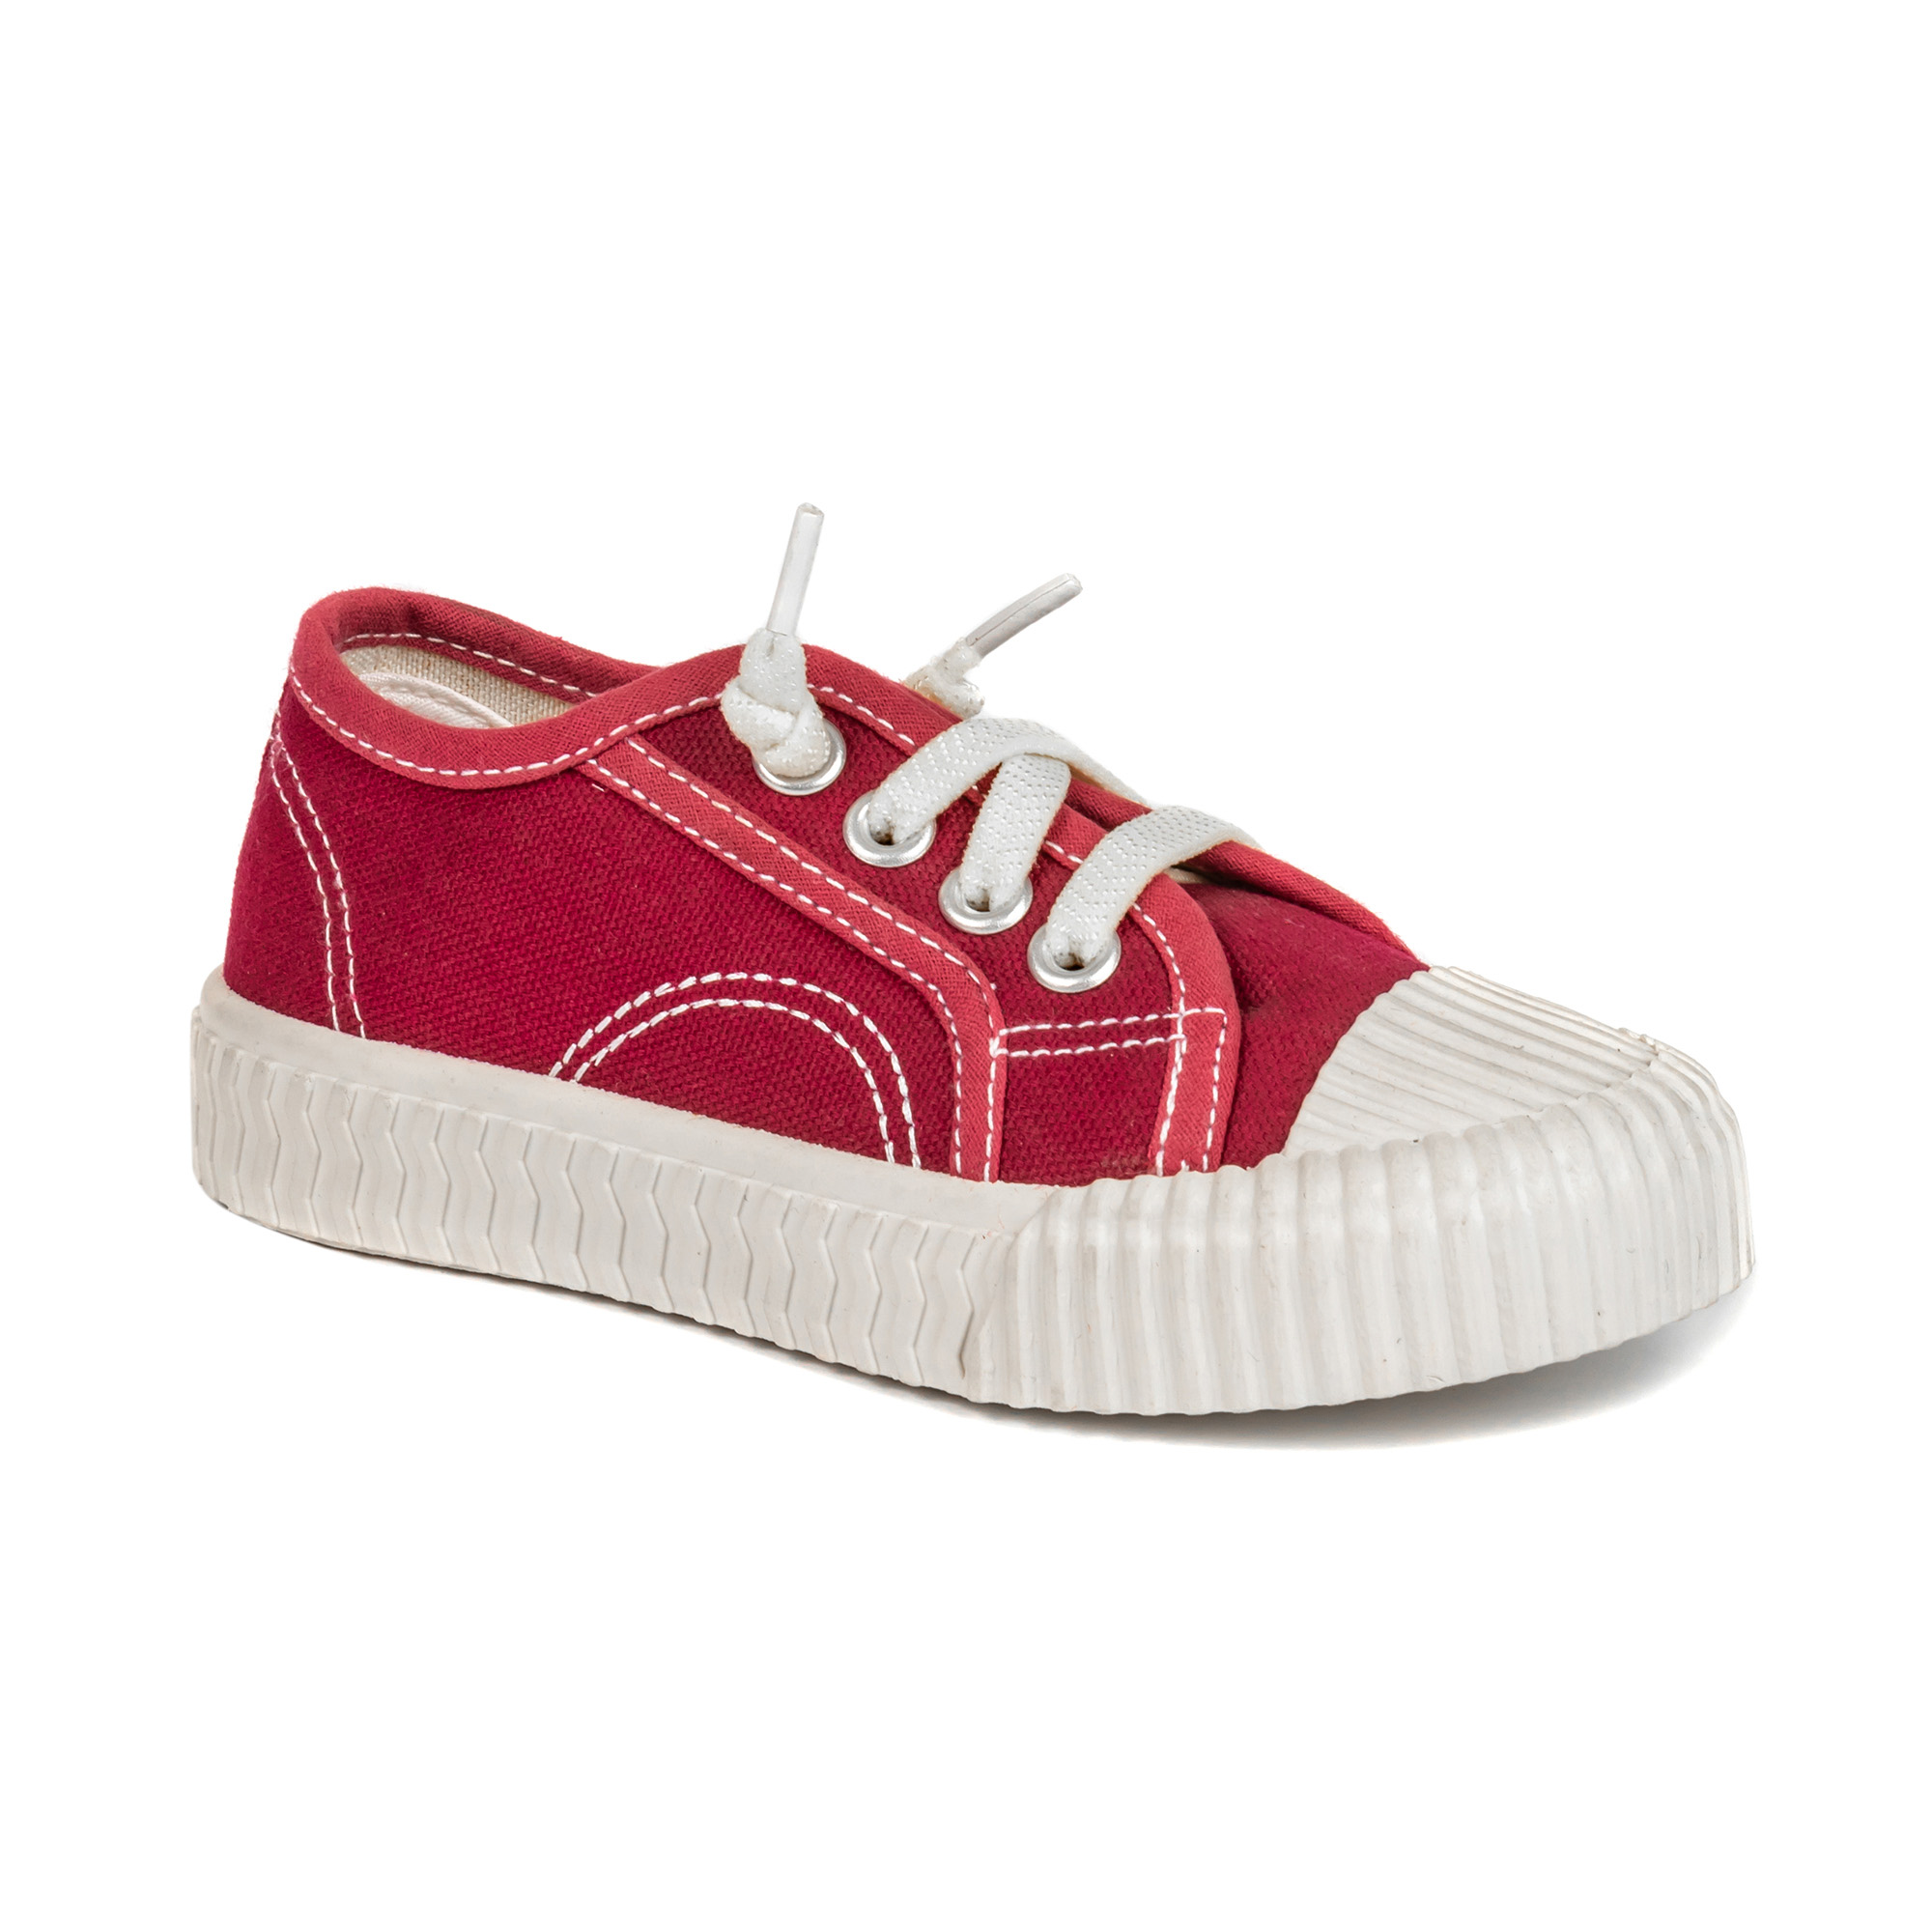 Sneaker Shoes, Children Shoes,Injection shoes ,Red, Textile  Upper+Lace PVC injection Outsole